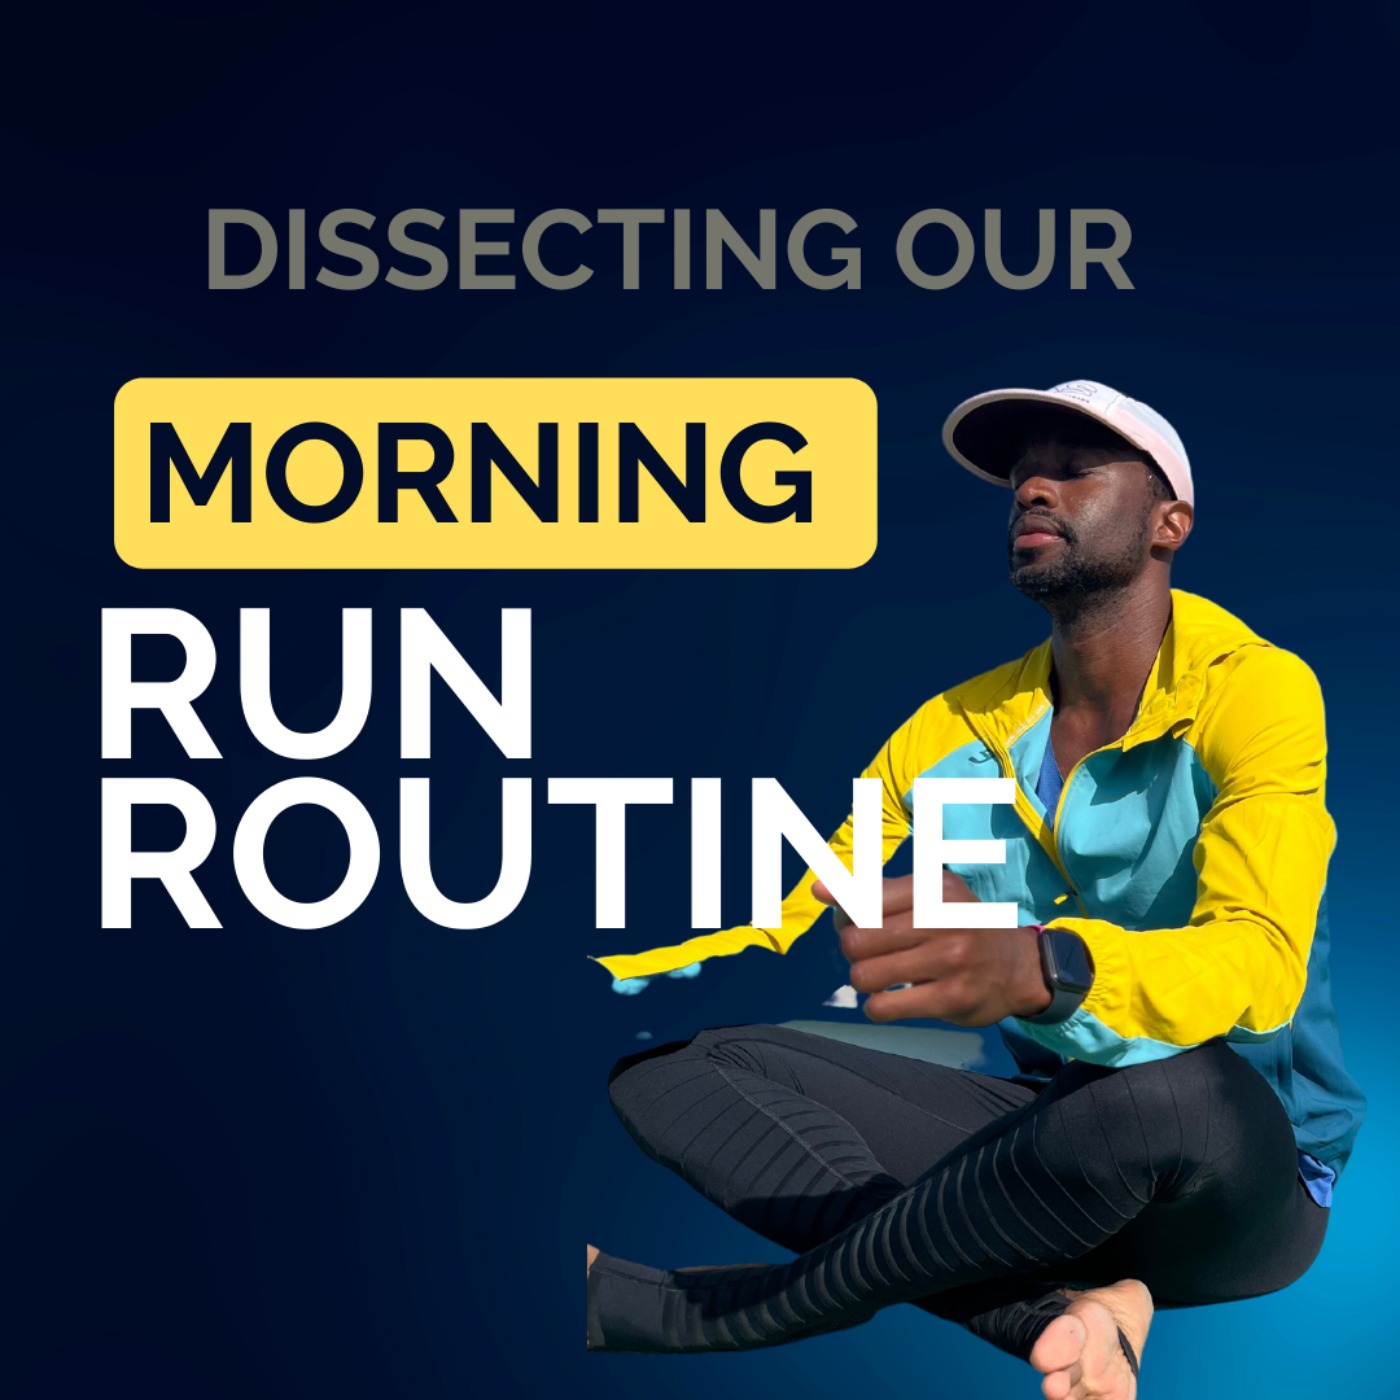 Morning Runner Routine Secrets That Might Surprise You